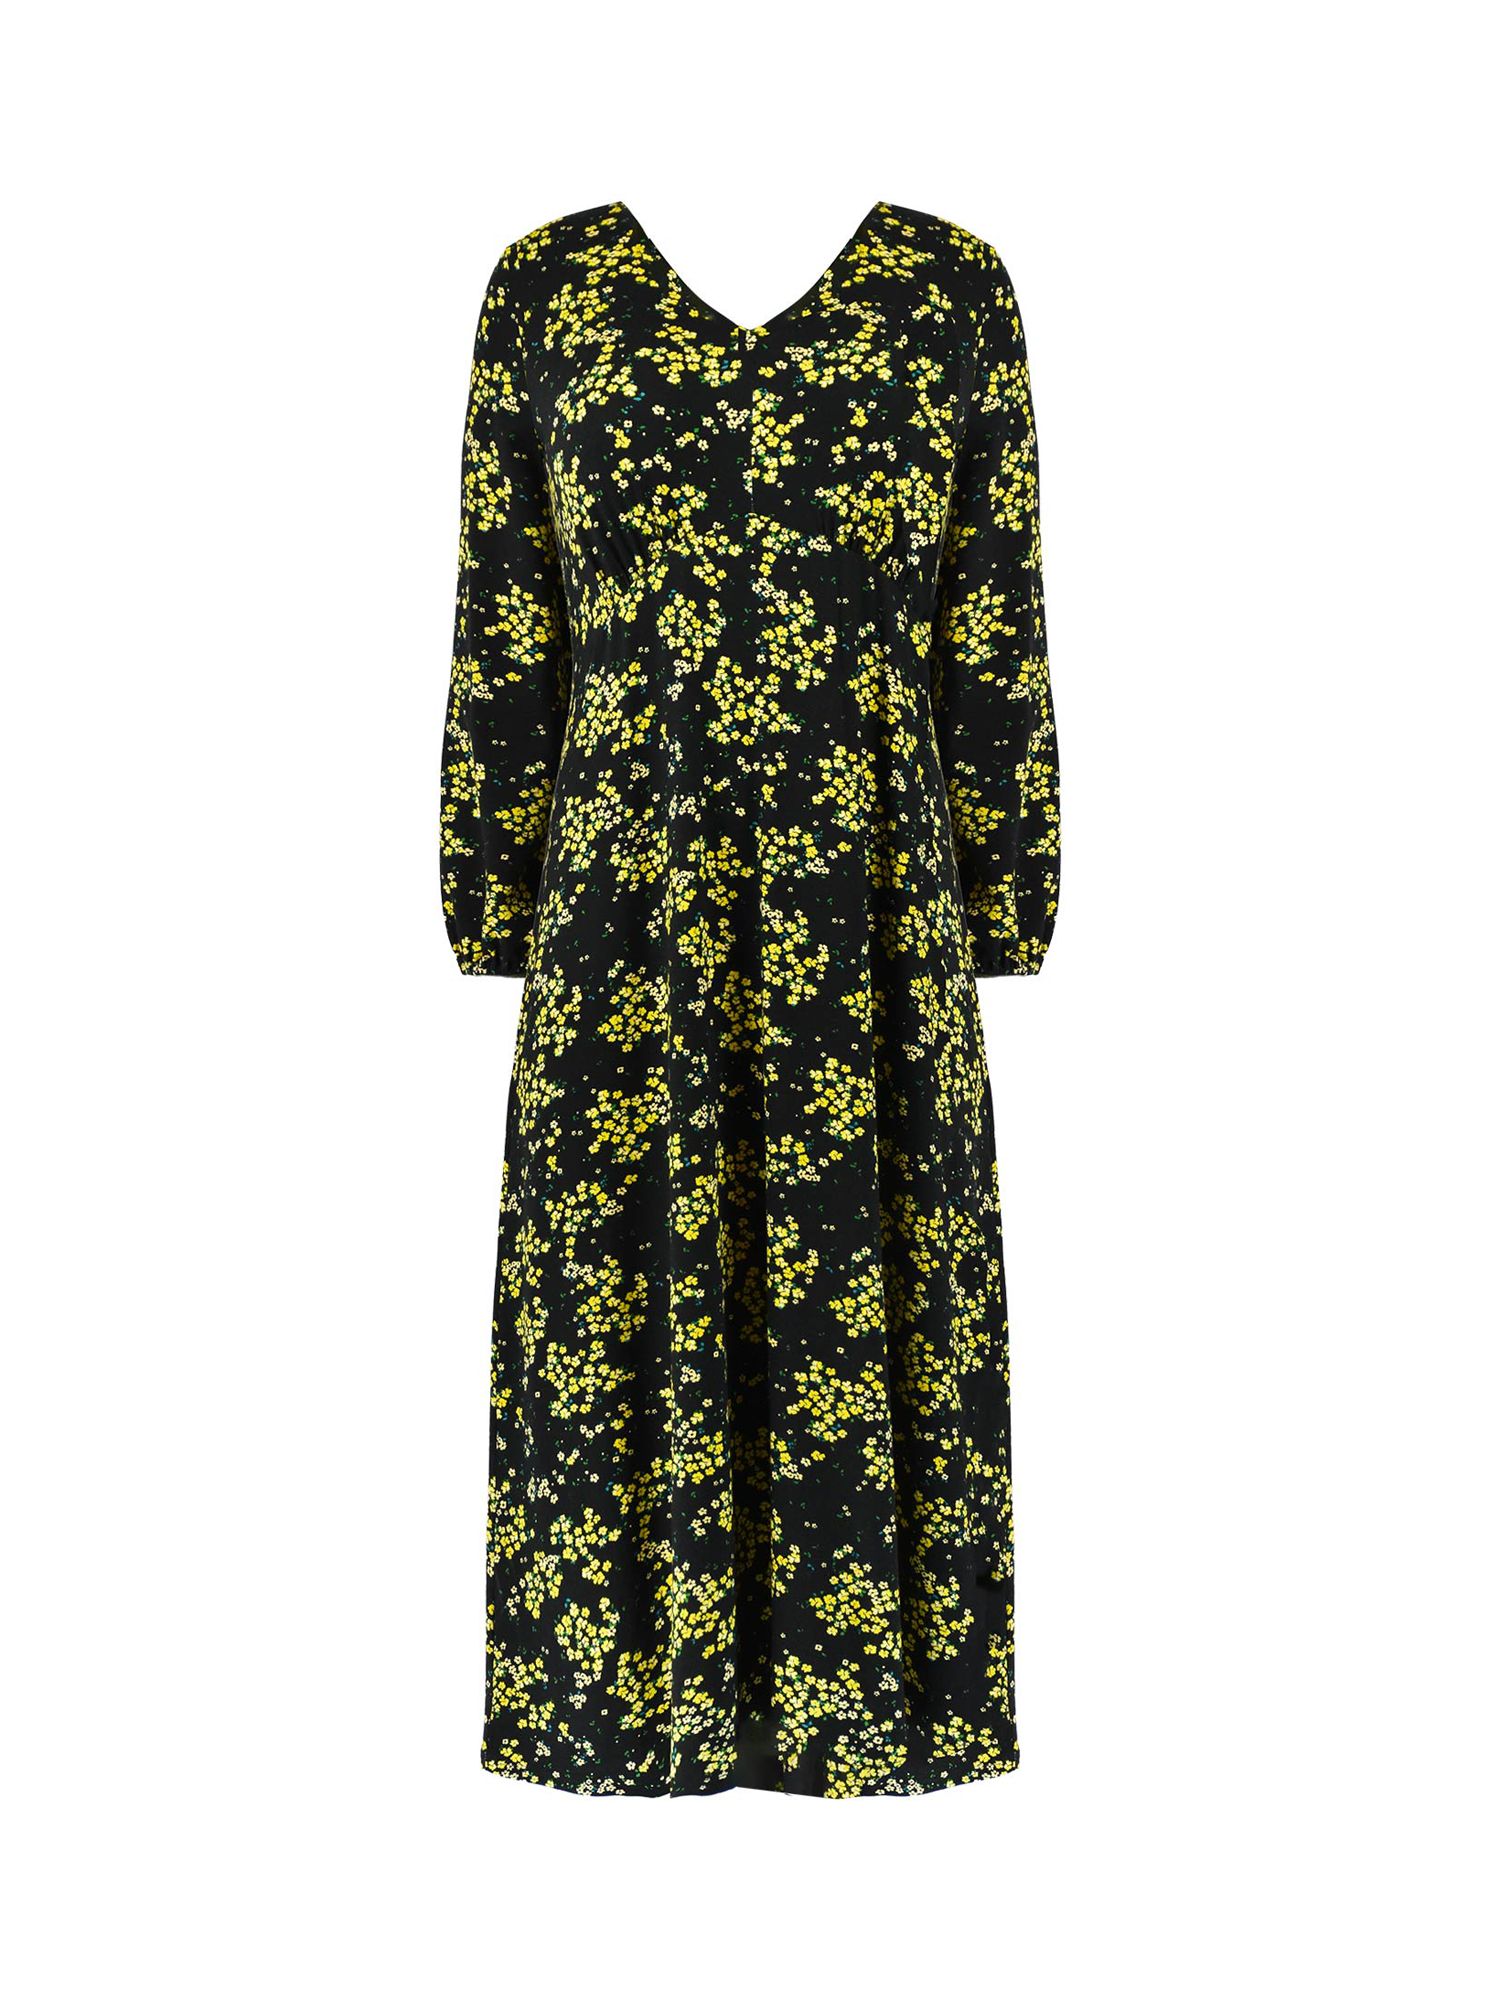 Live Unlimited Curve Ditsy Floral Print Gathered Midi Dress, Yellow/Black, 14